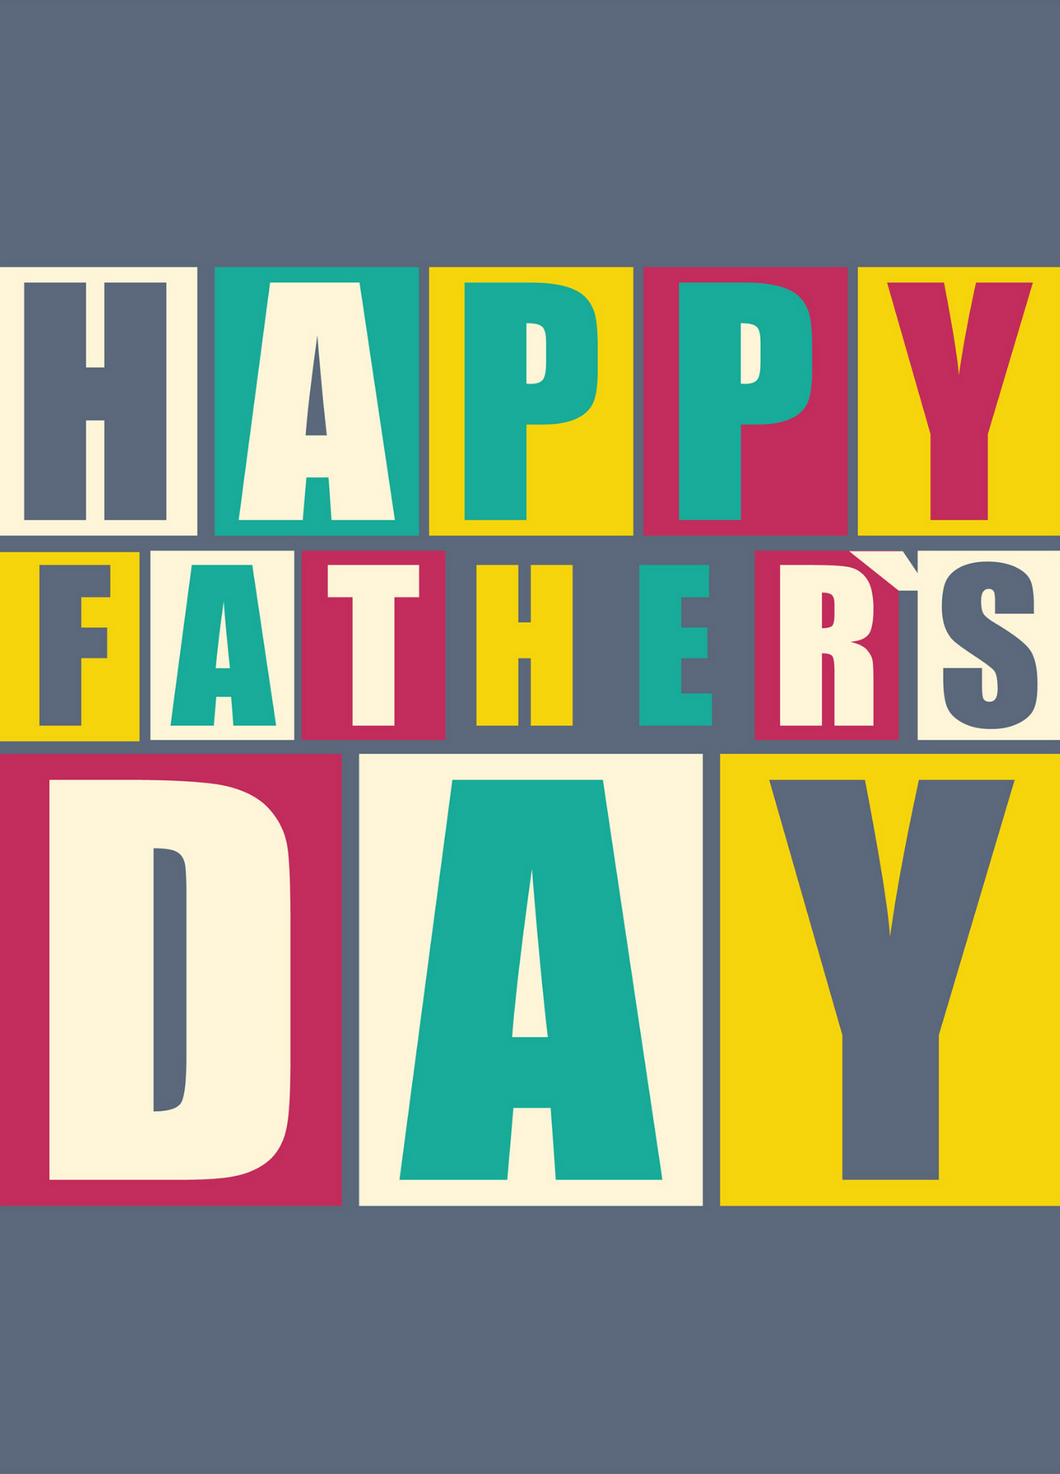 Father's Day Recordable Audio Voice Greeting Card